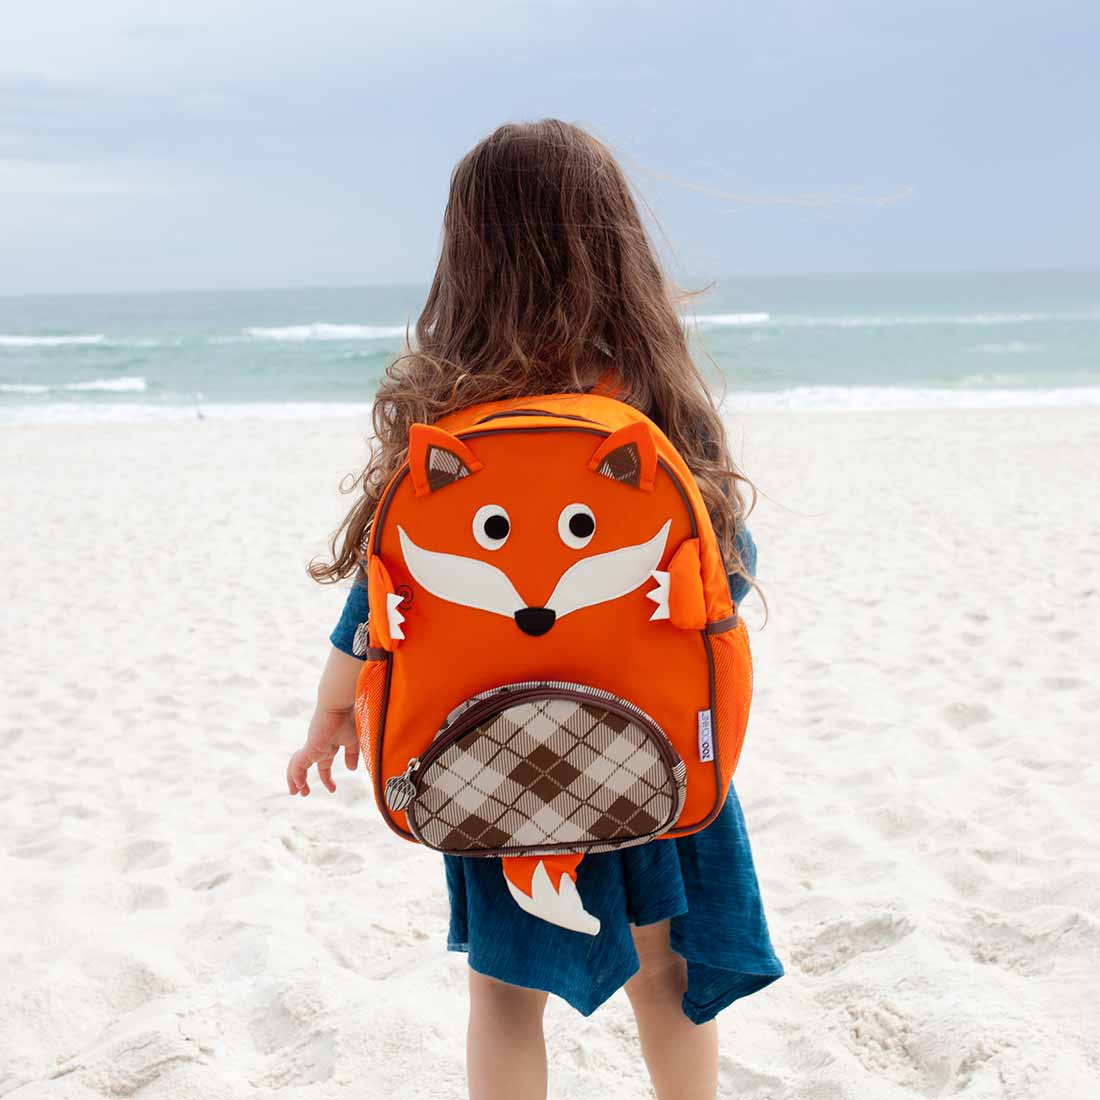 Zoocchini Toddler Backpacks - Finley the Fox